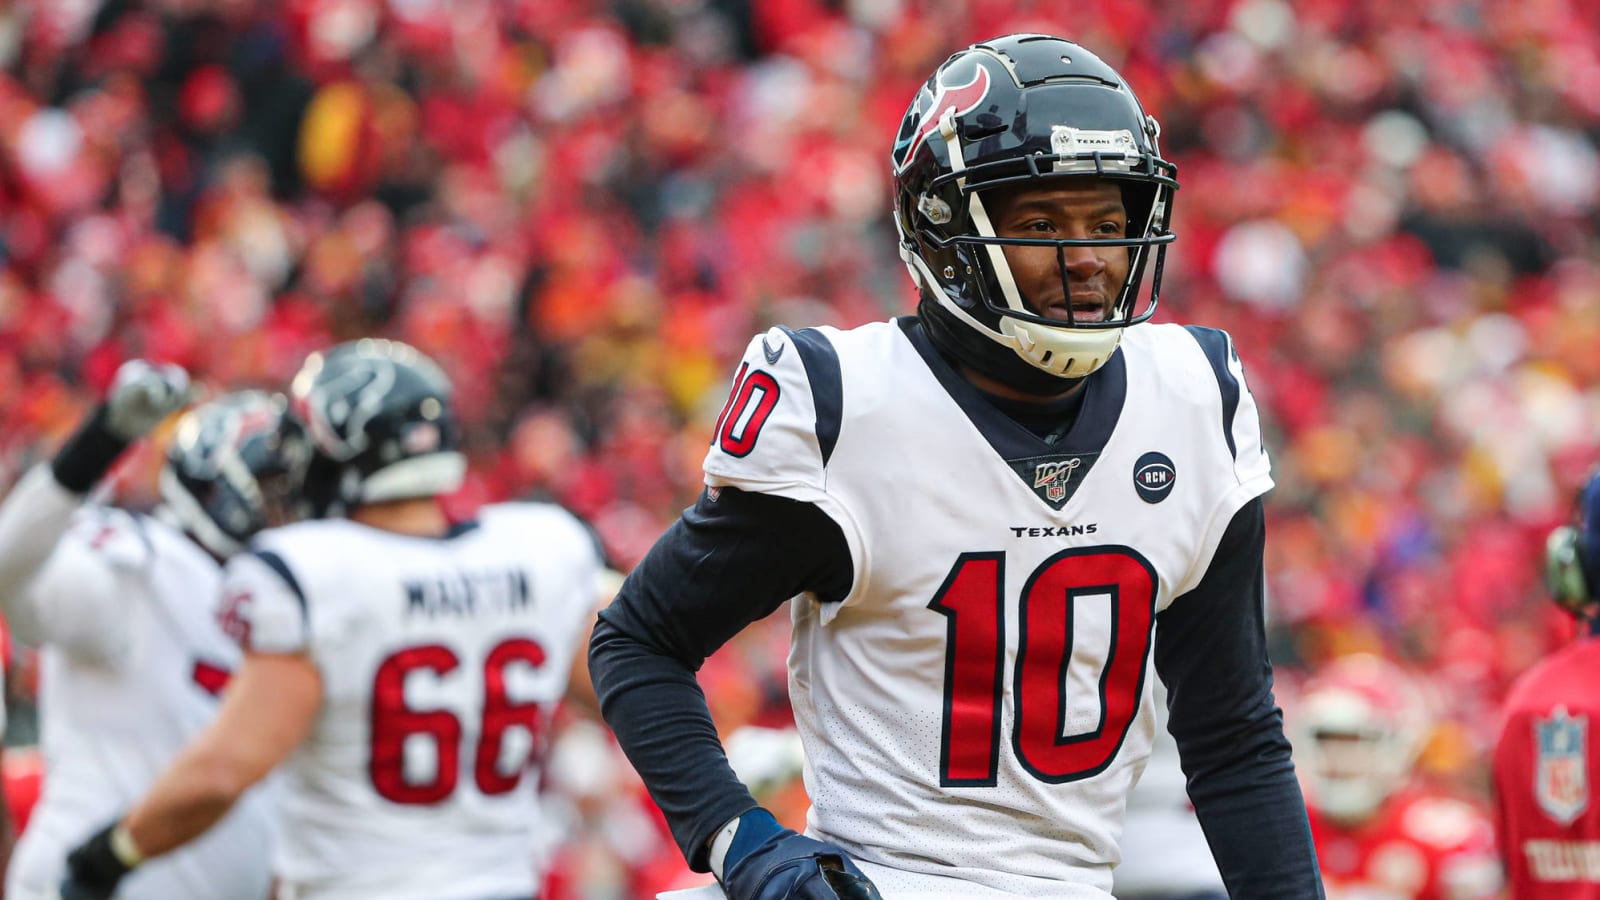 DeAndre Hopkins quotes Kawhi Leonard in first message to Cardinals fans ...